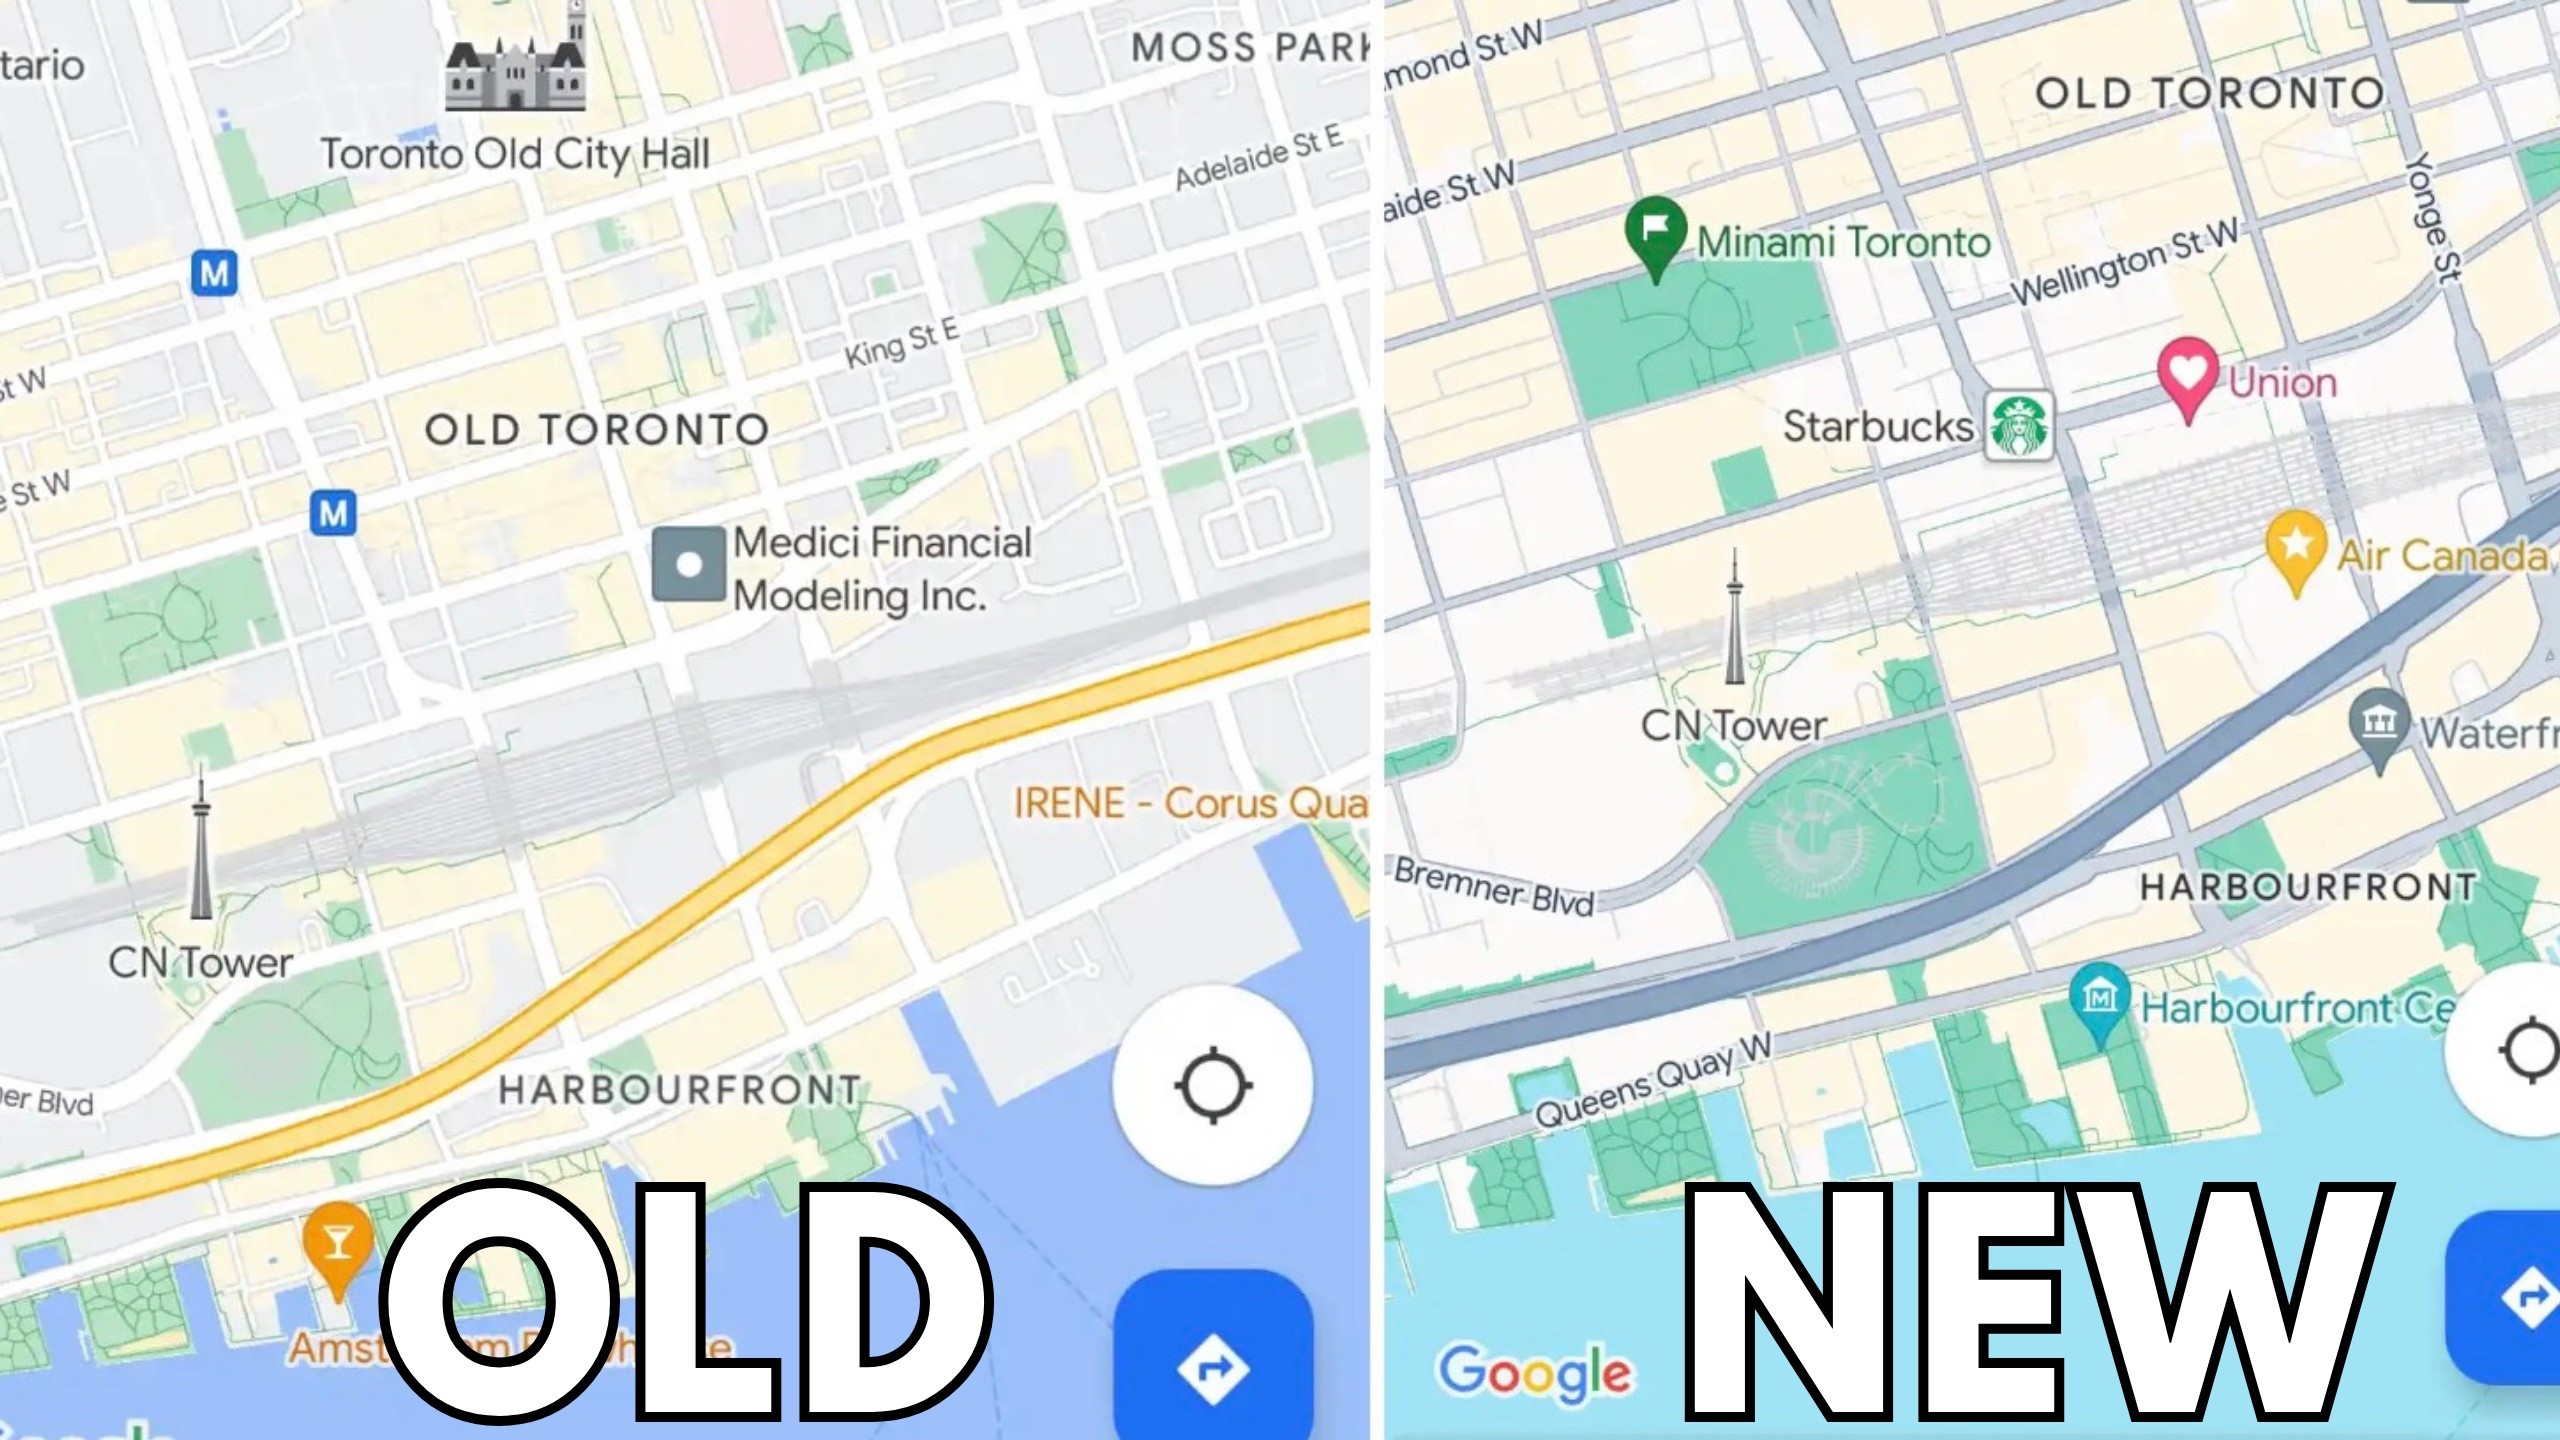 Google Quietly Releases a Google Maps Interface Update, Copies Its